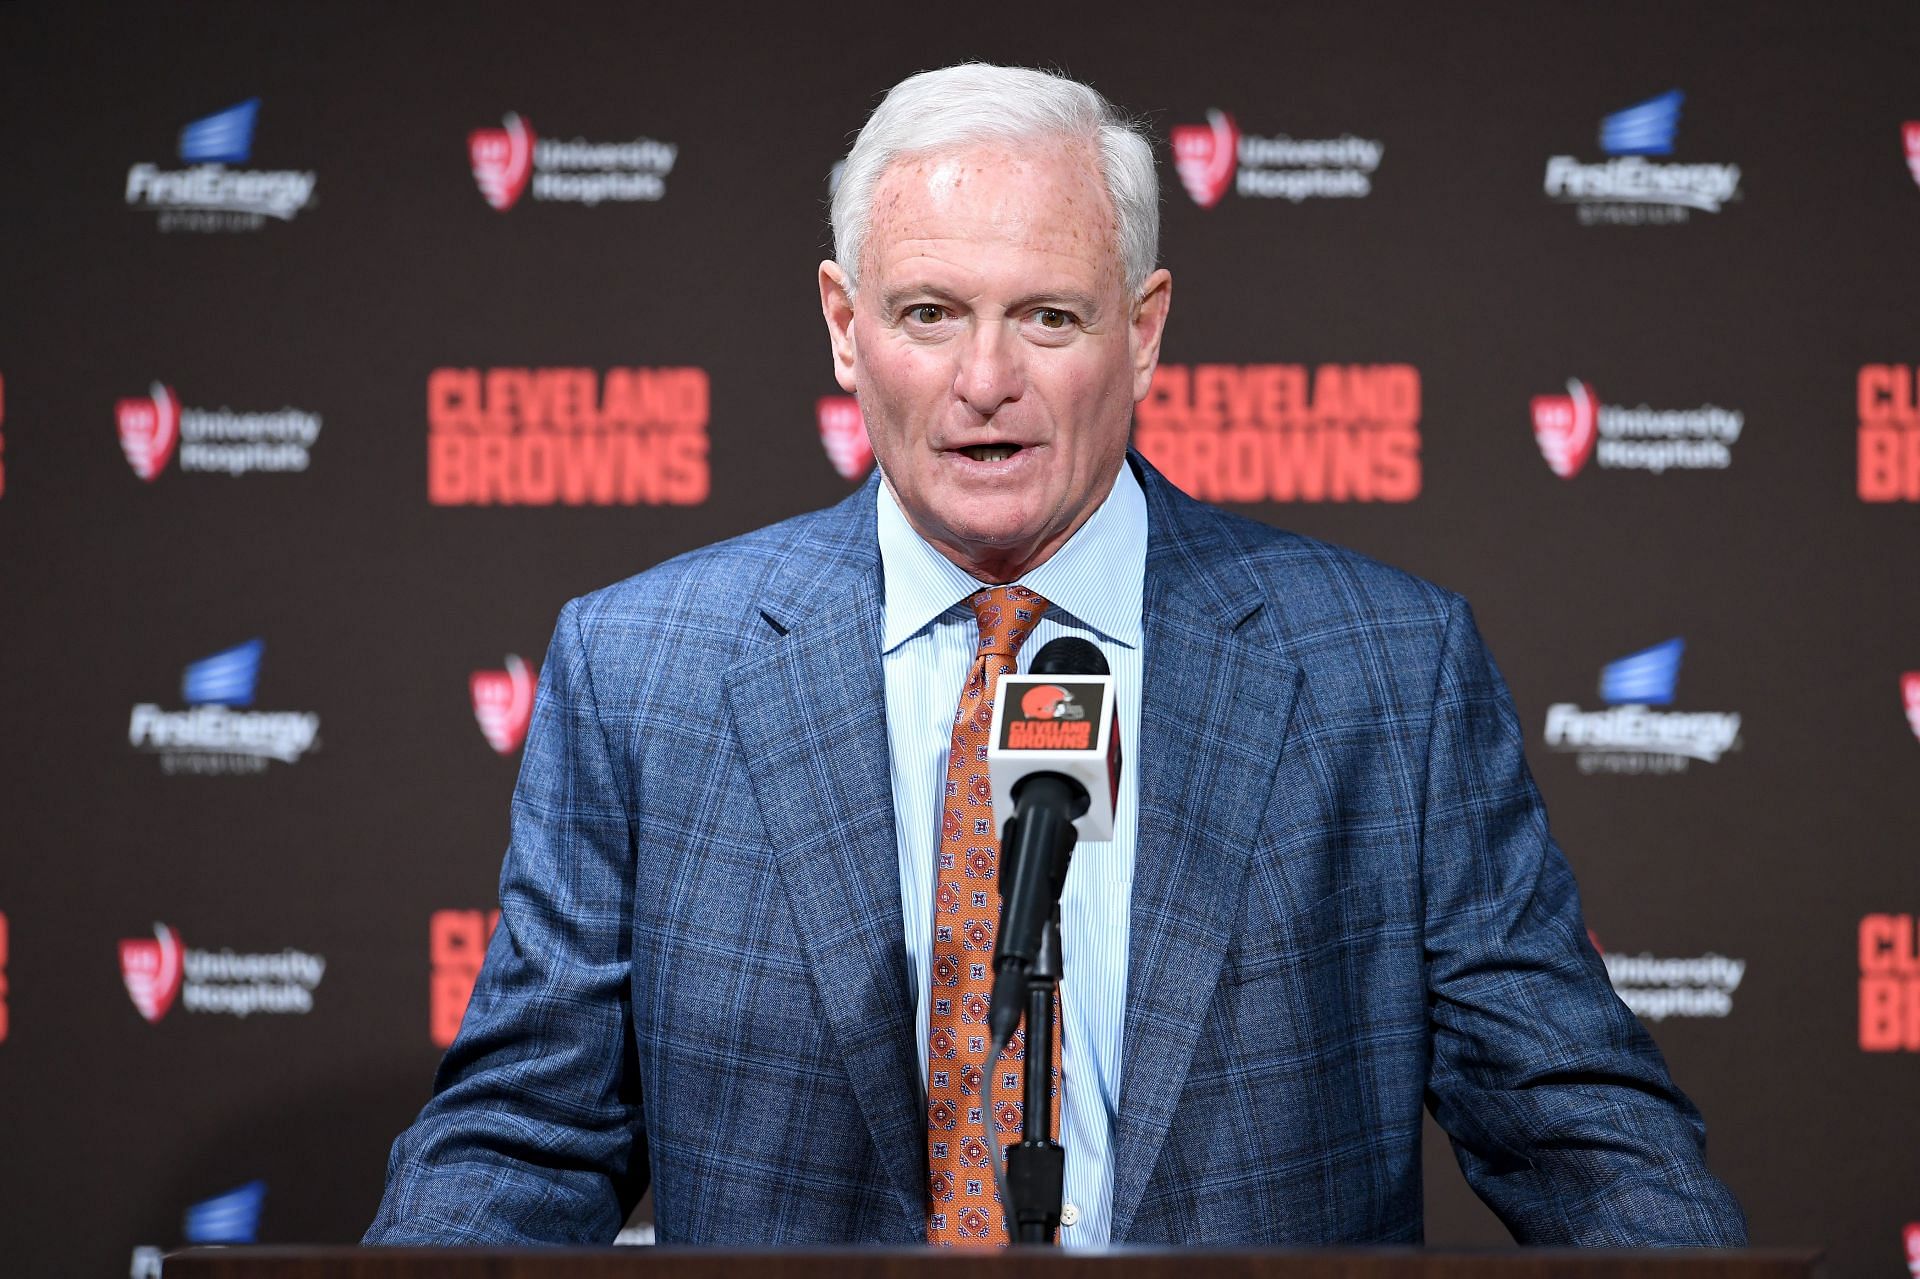 The Cleveland Browns owner Jimmy Haslam